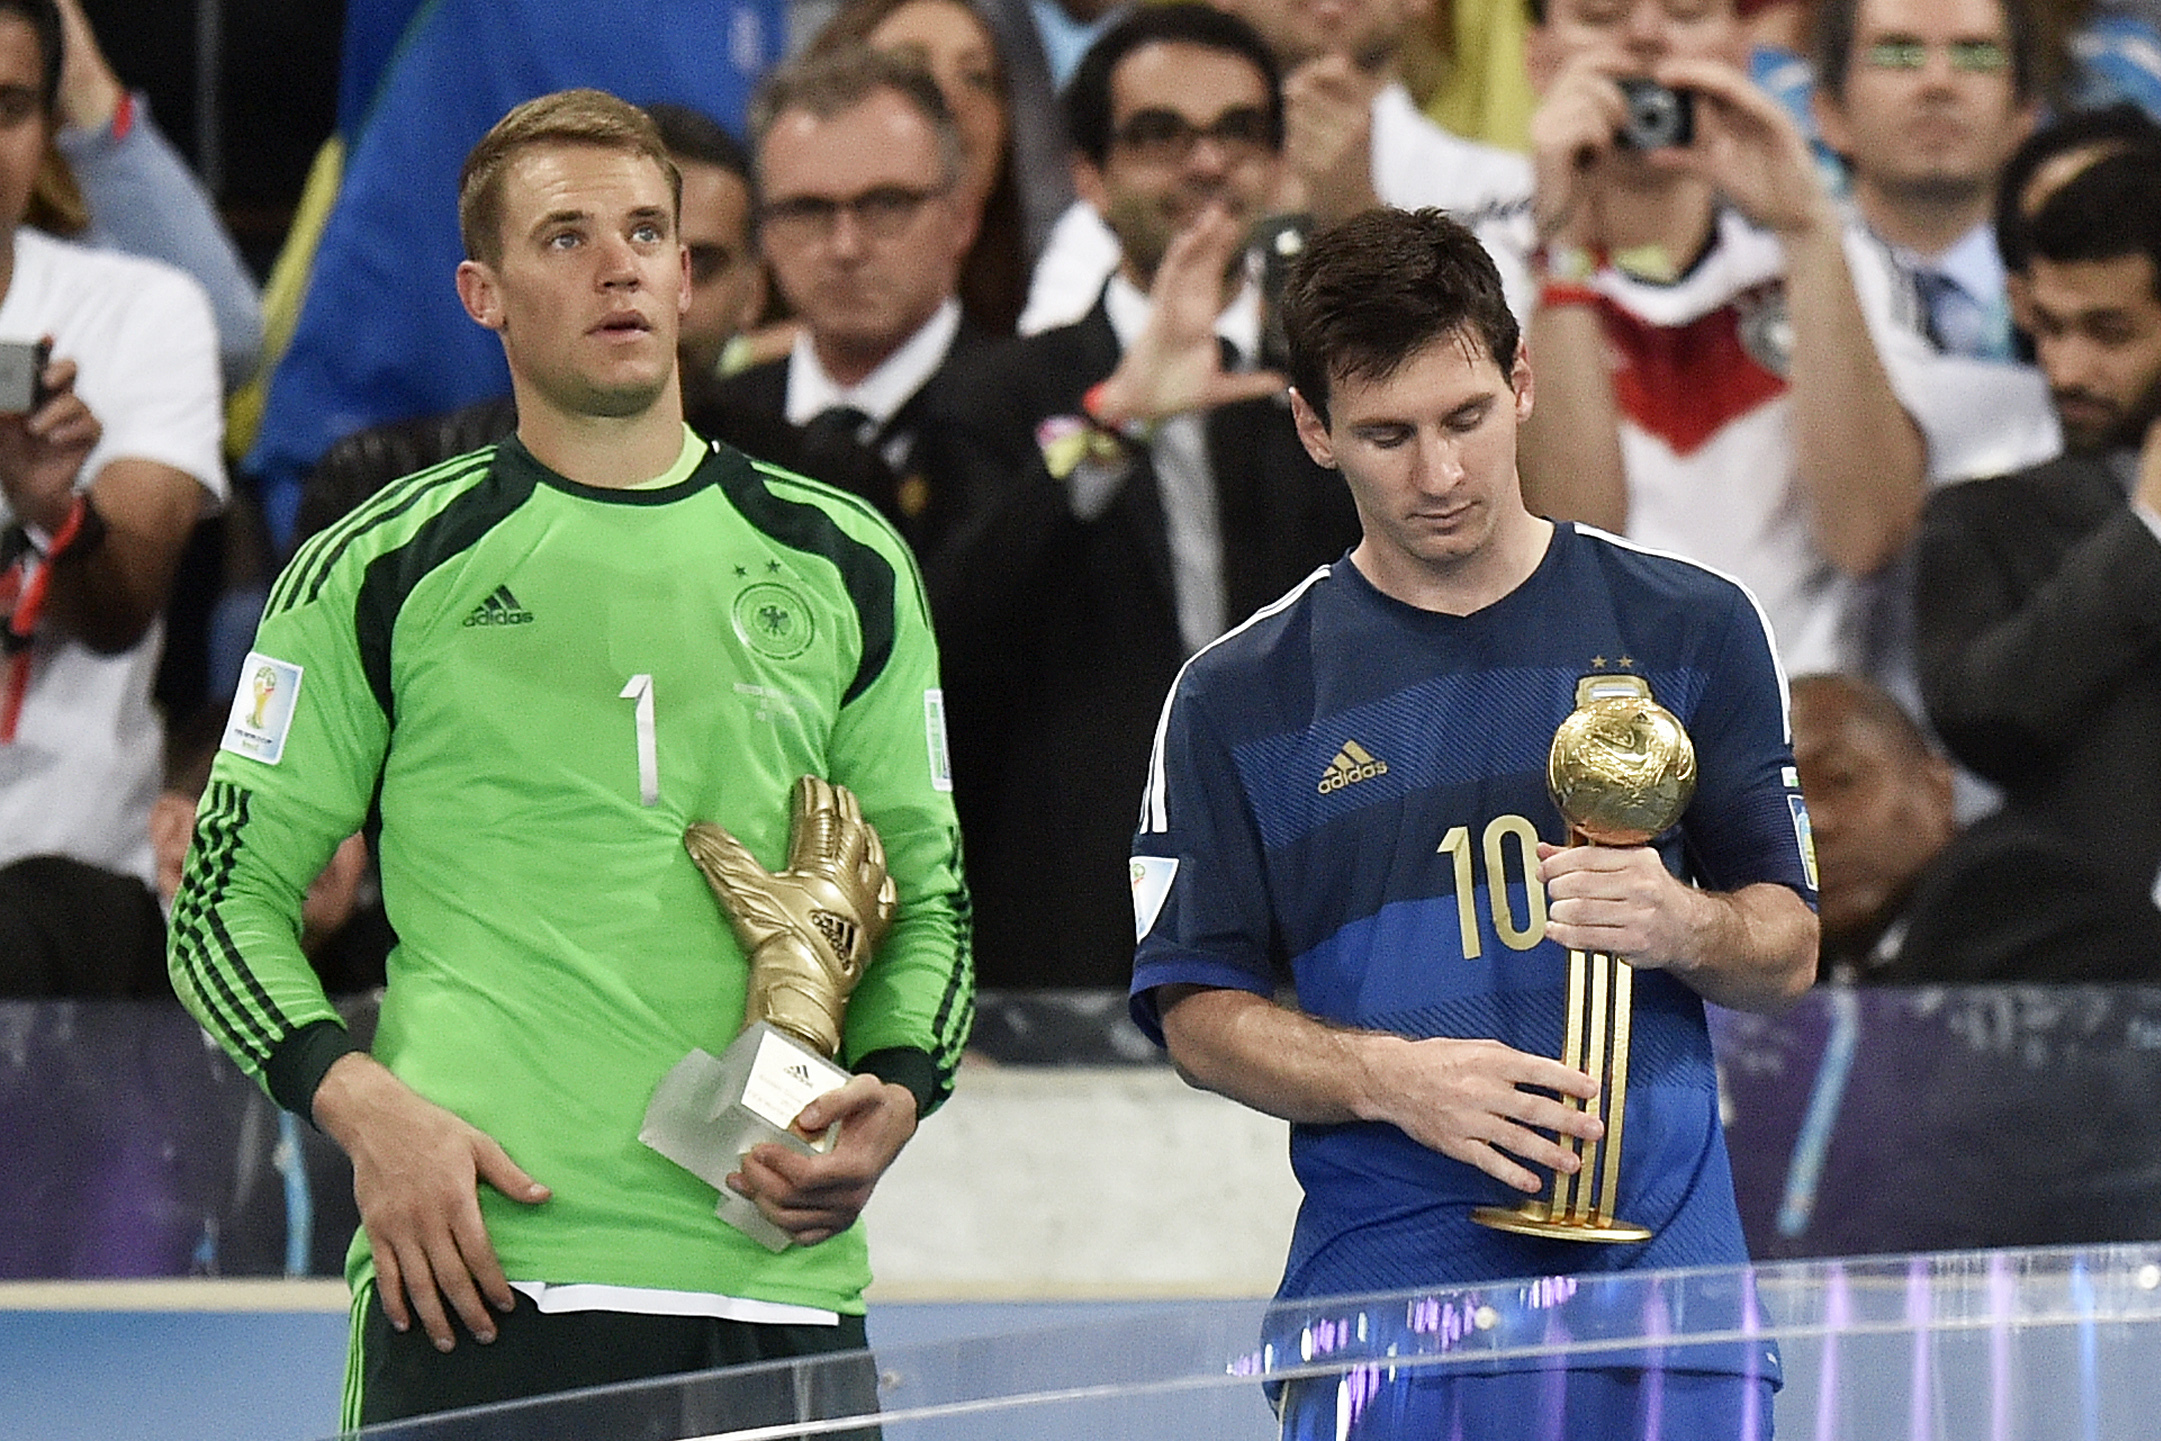 FIFA World Cup: A Look at Who's Up for the Golden Glove Award